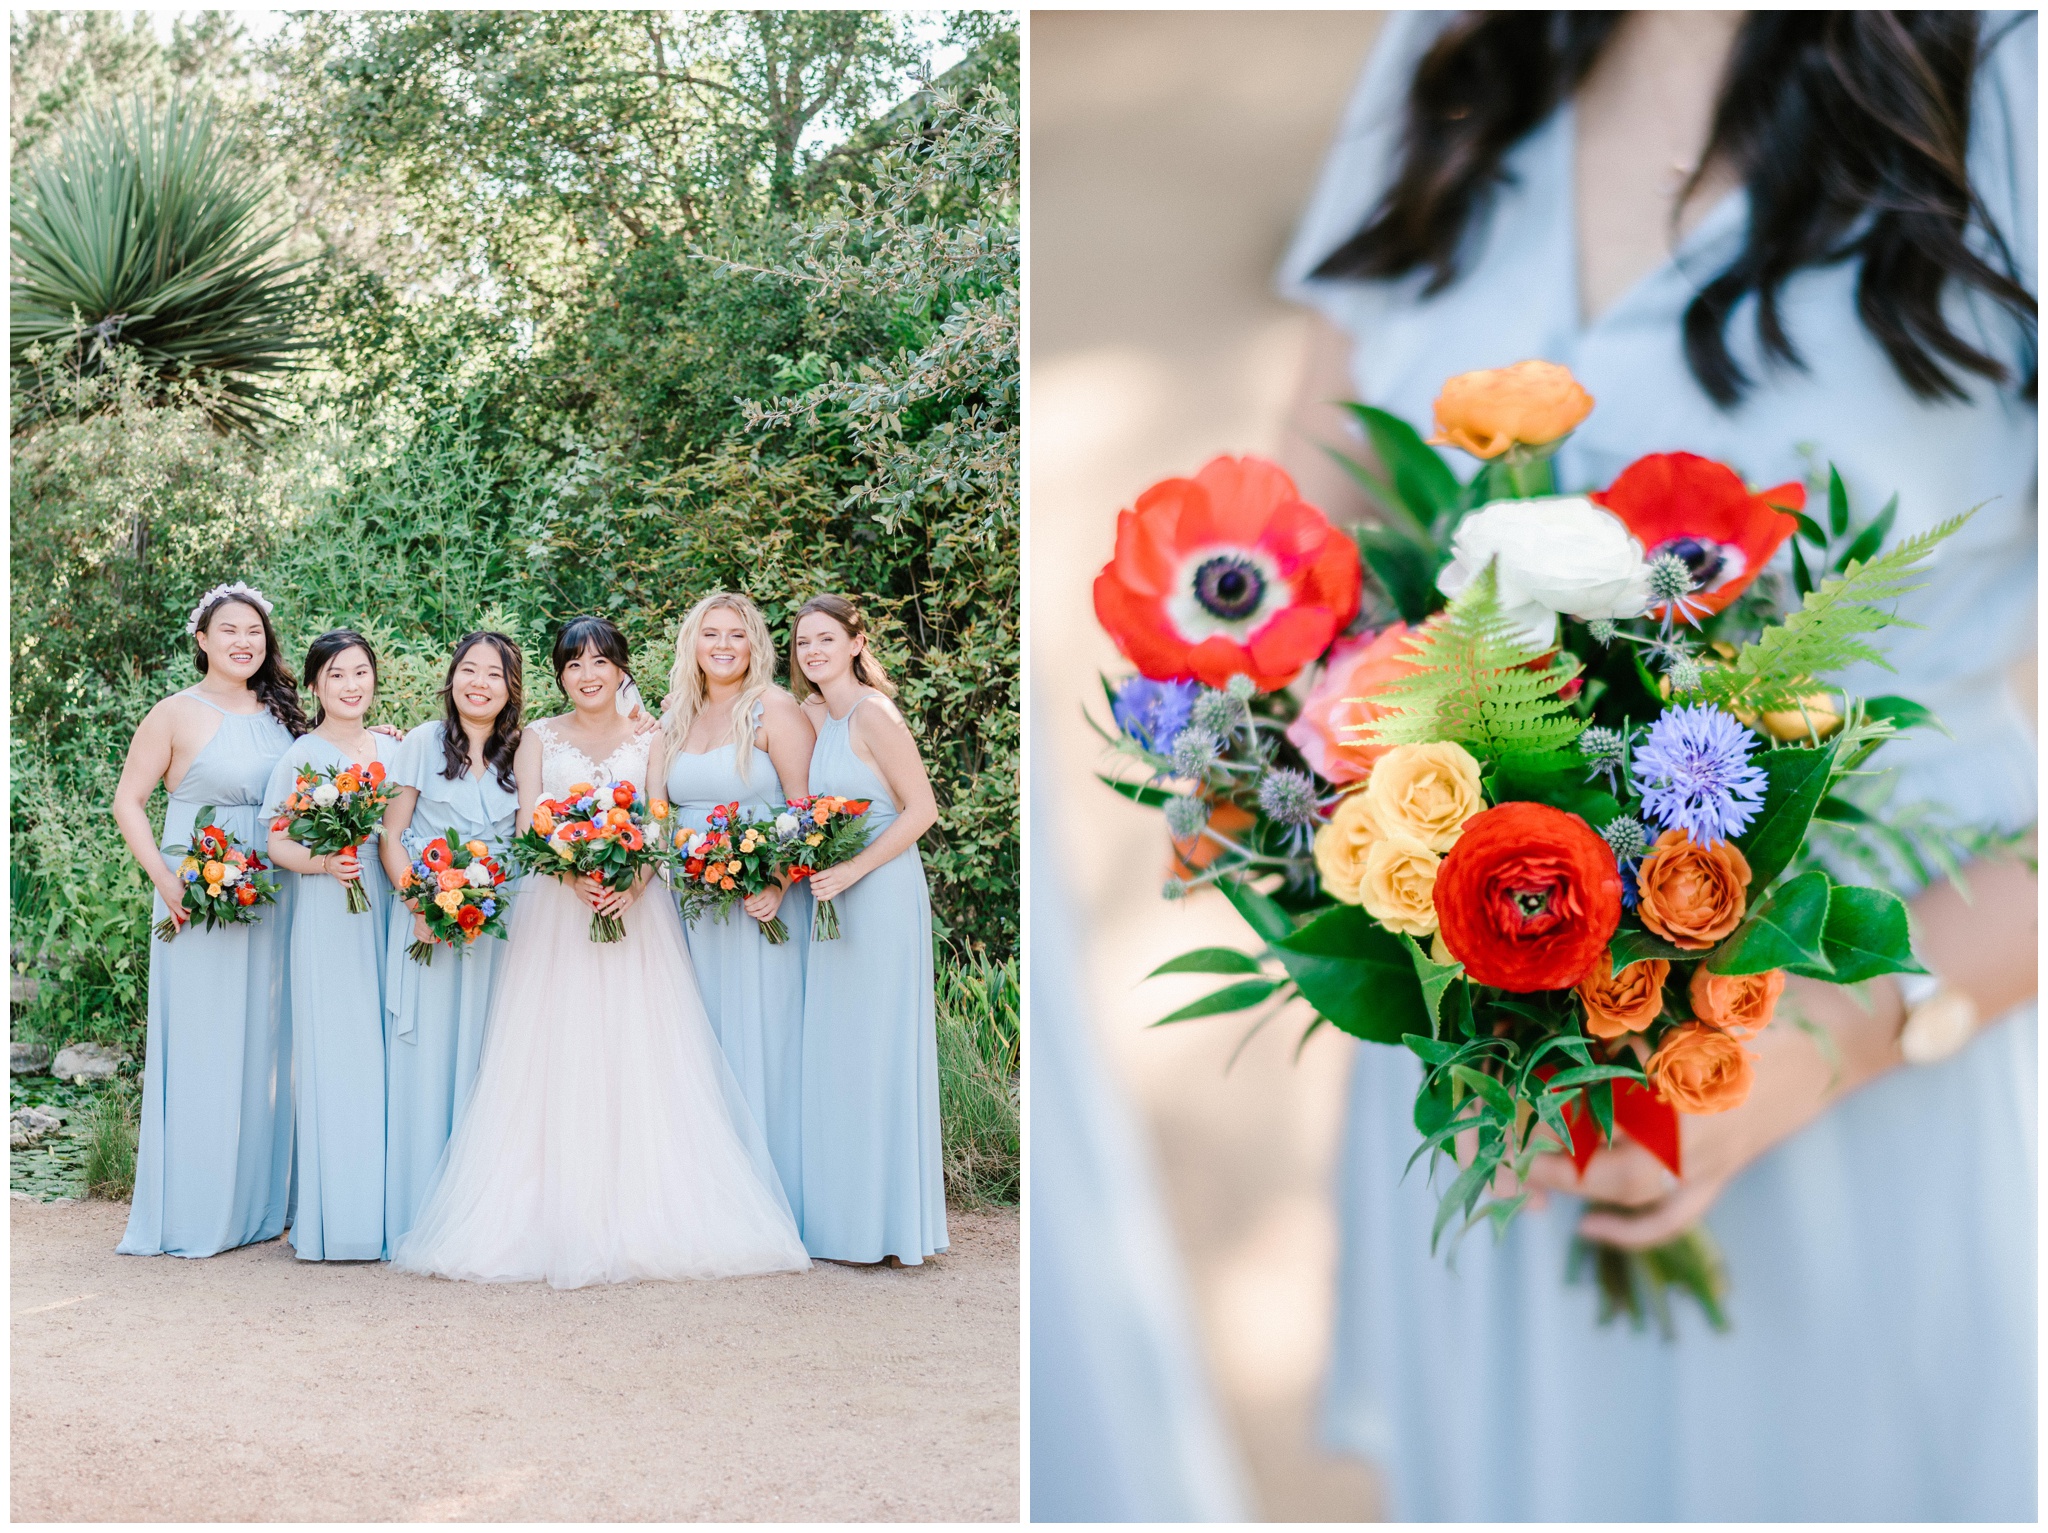 Pale blue bridesmaid dress inspiration, bridal bouquet with red anemones, Joslyn Holtfort Wedding Photography